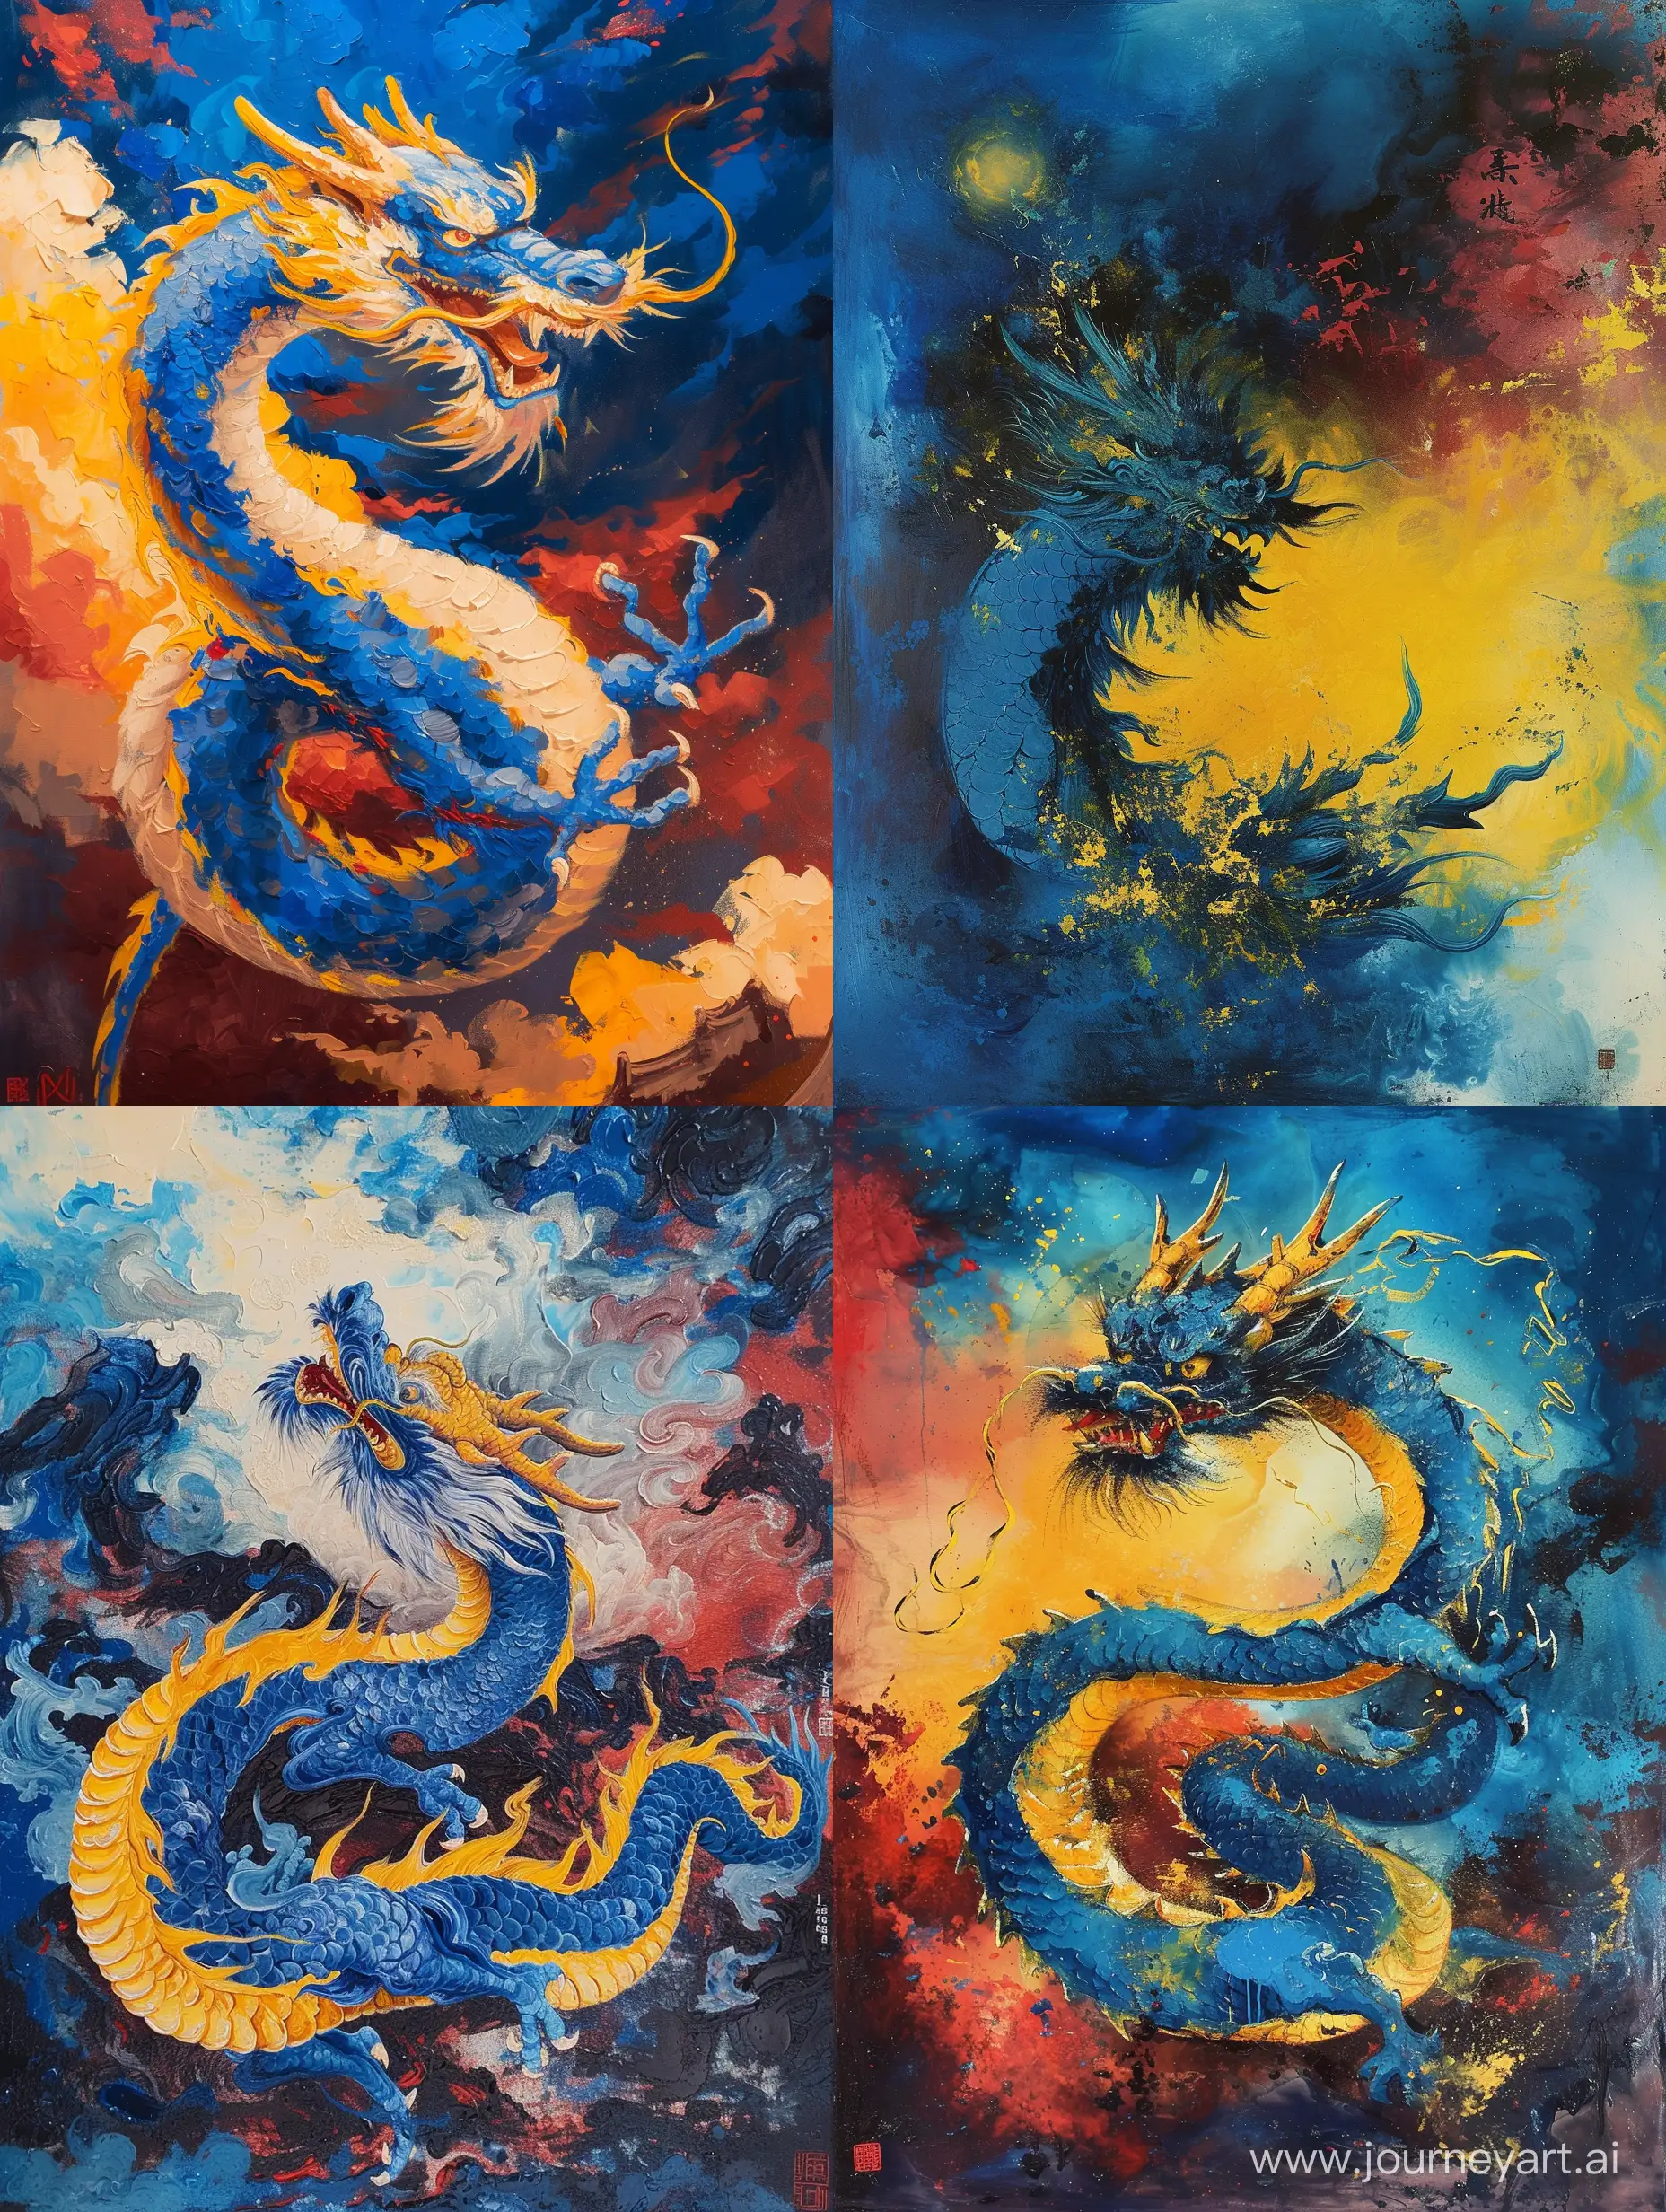 a painting of a Chinese dragon in blue and yellow colors, in the style of expressionist figures, the stars art group (xing xing), jewish life scenes, thick impasto landscapes, mote kei, dark sky-blue and red, careful framing